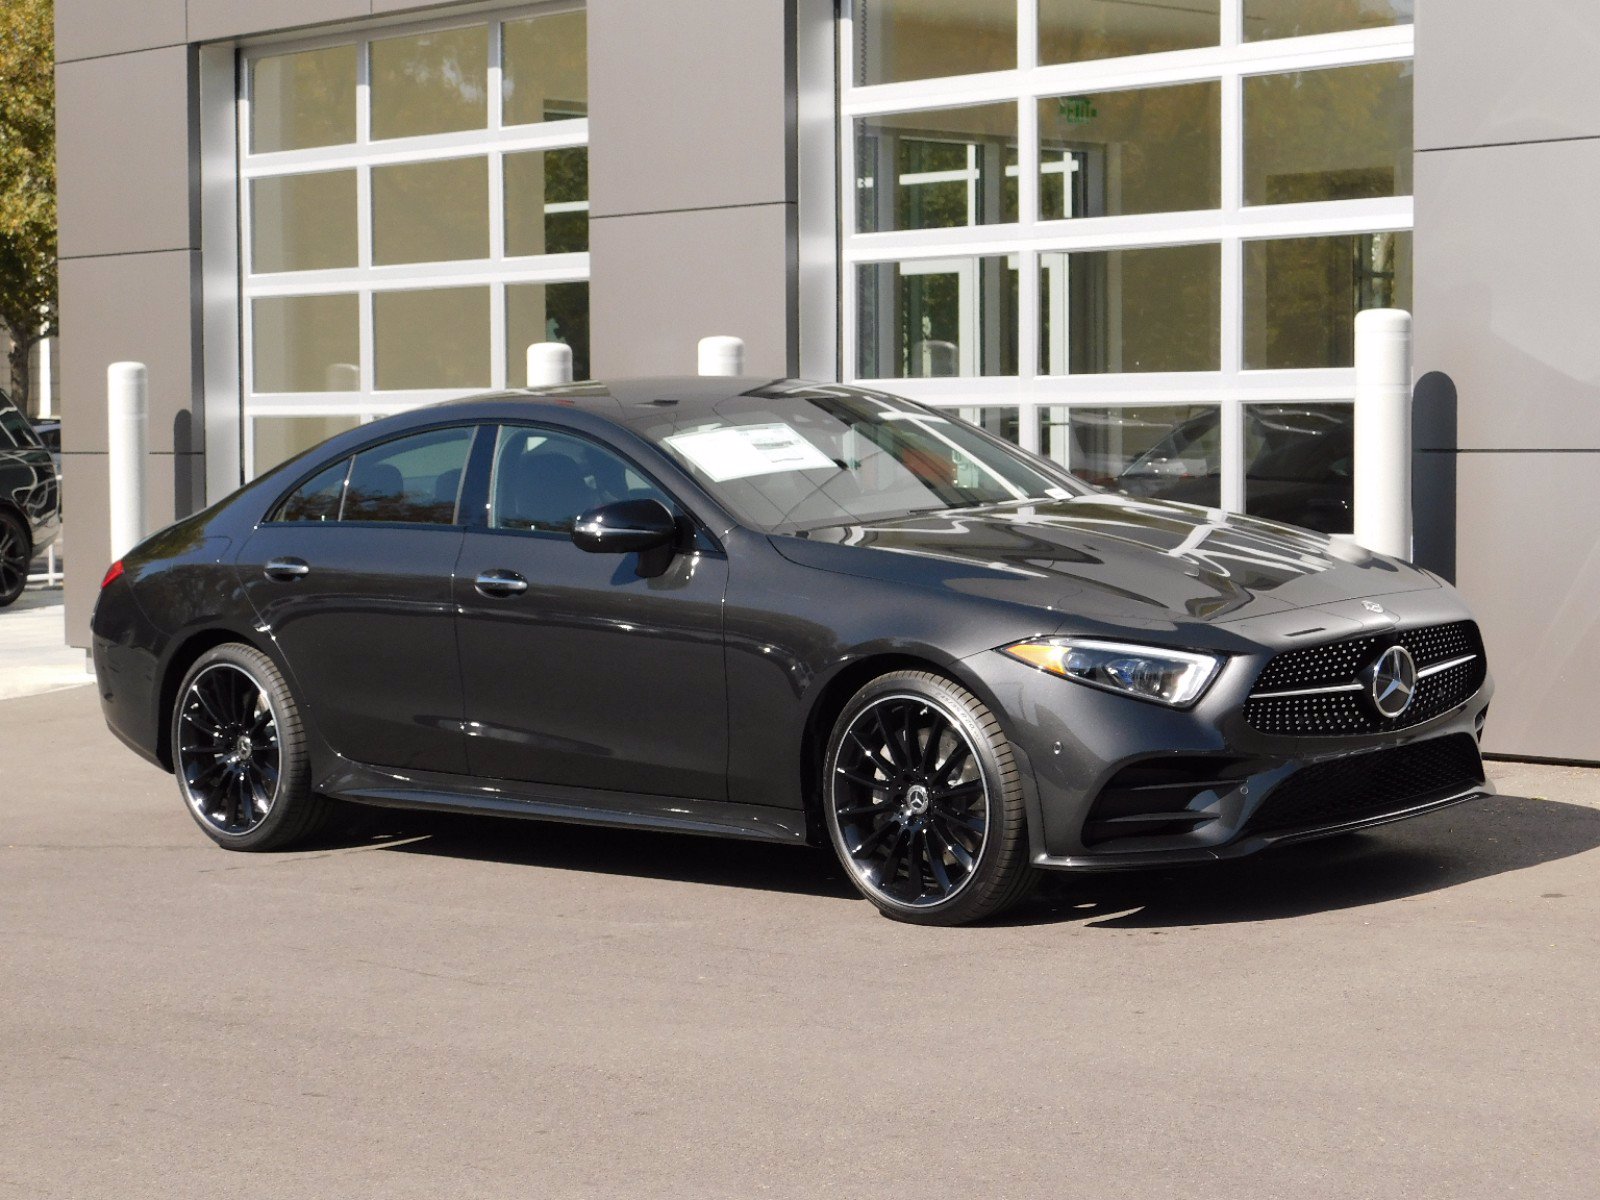 New 2020 Mercedes Benz Cls Cls 450 Coupe In Salt Lake City 1m0114